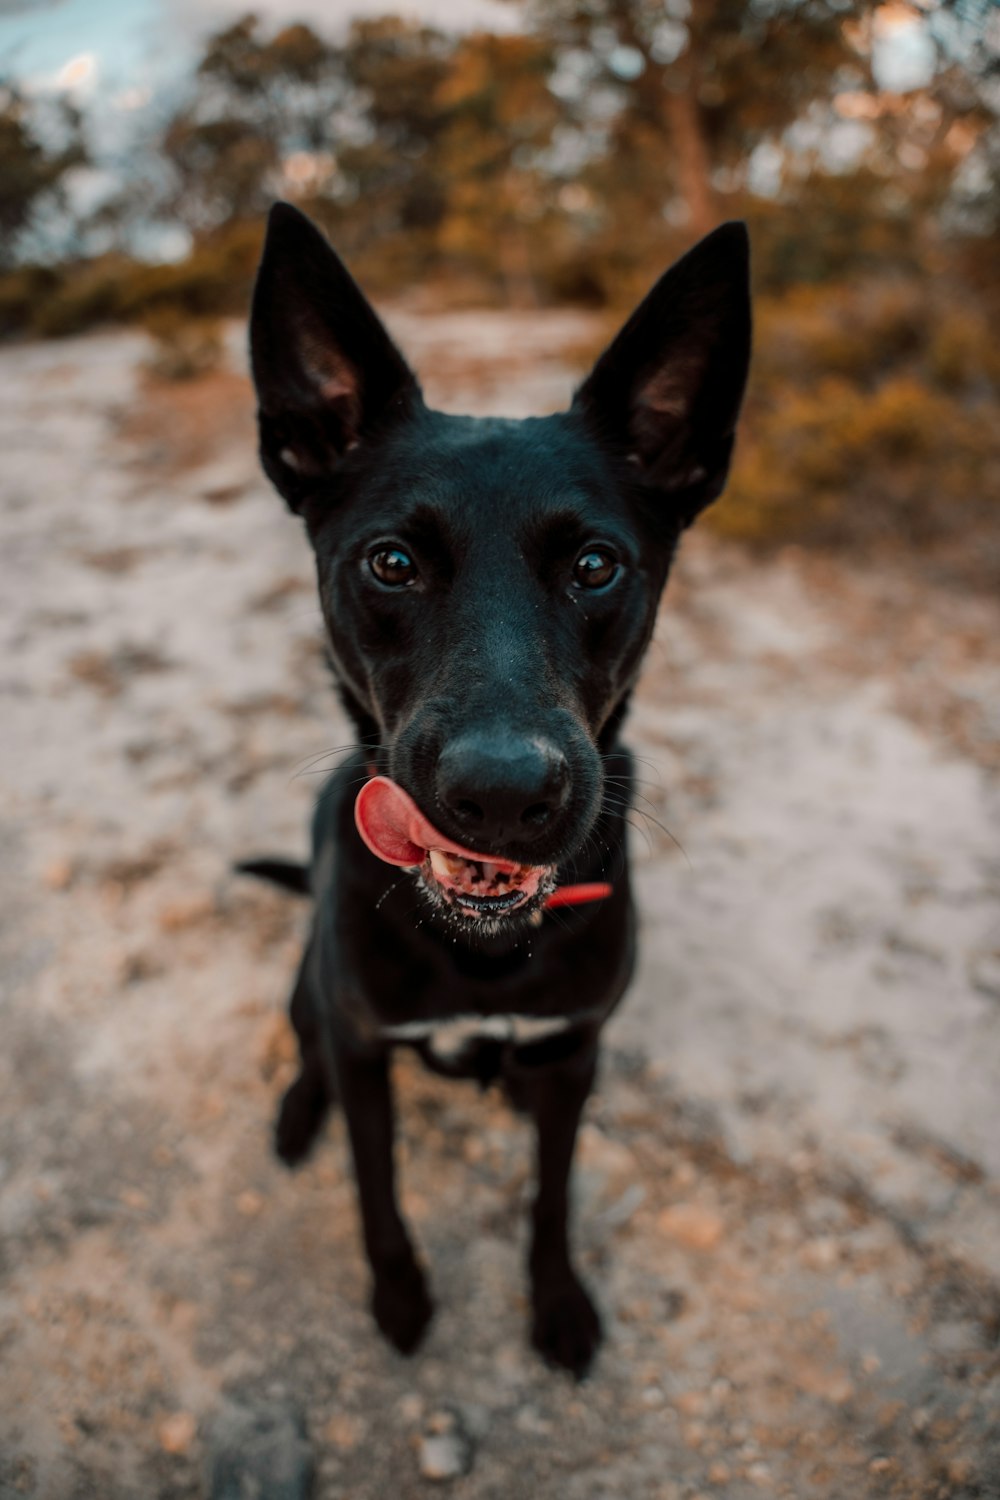 a black dog with a red collar looking up at the camera